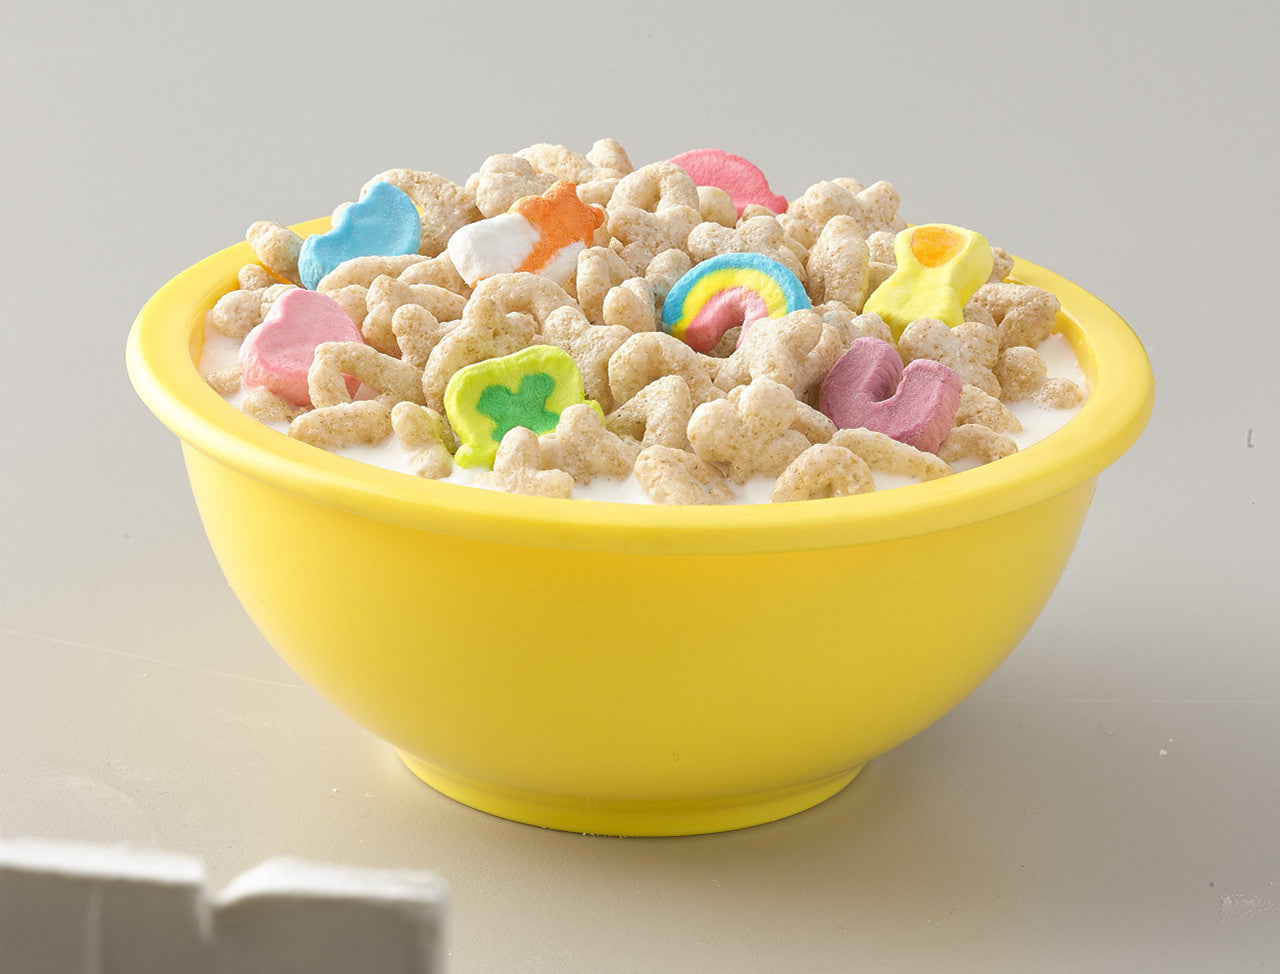 General Mills - Cereal Lucky Charms (300 g)